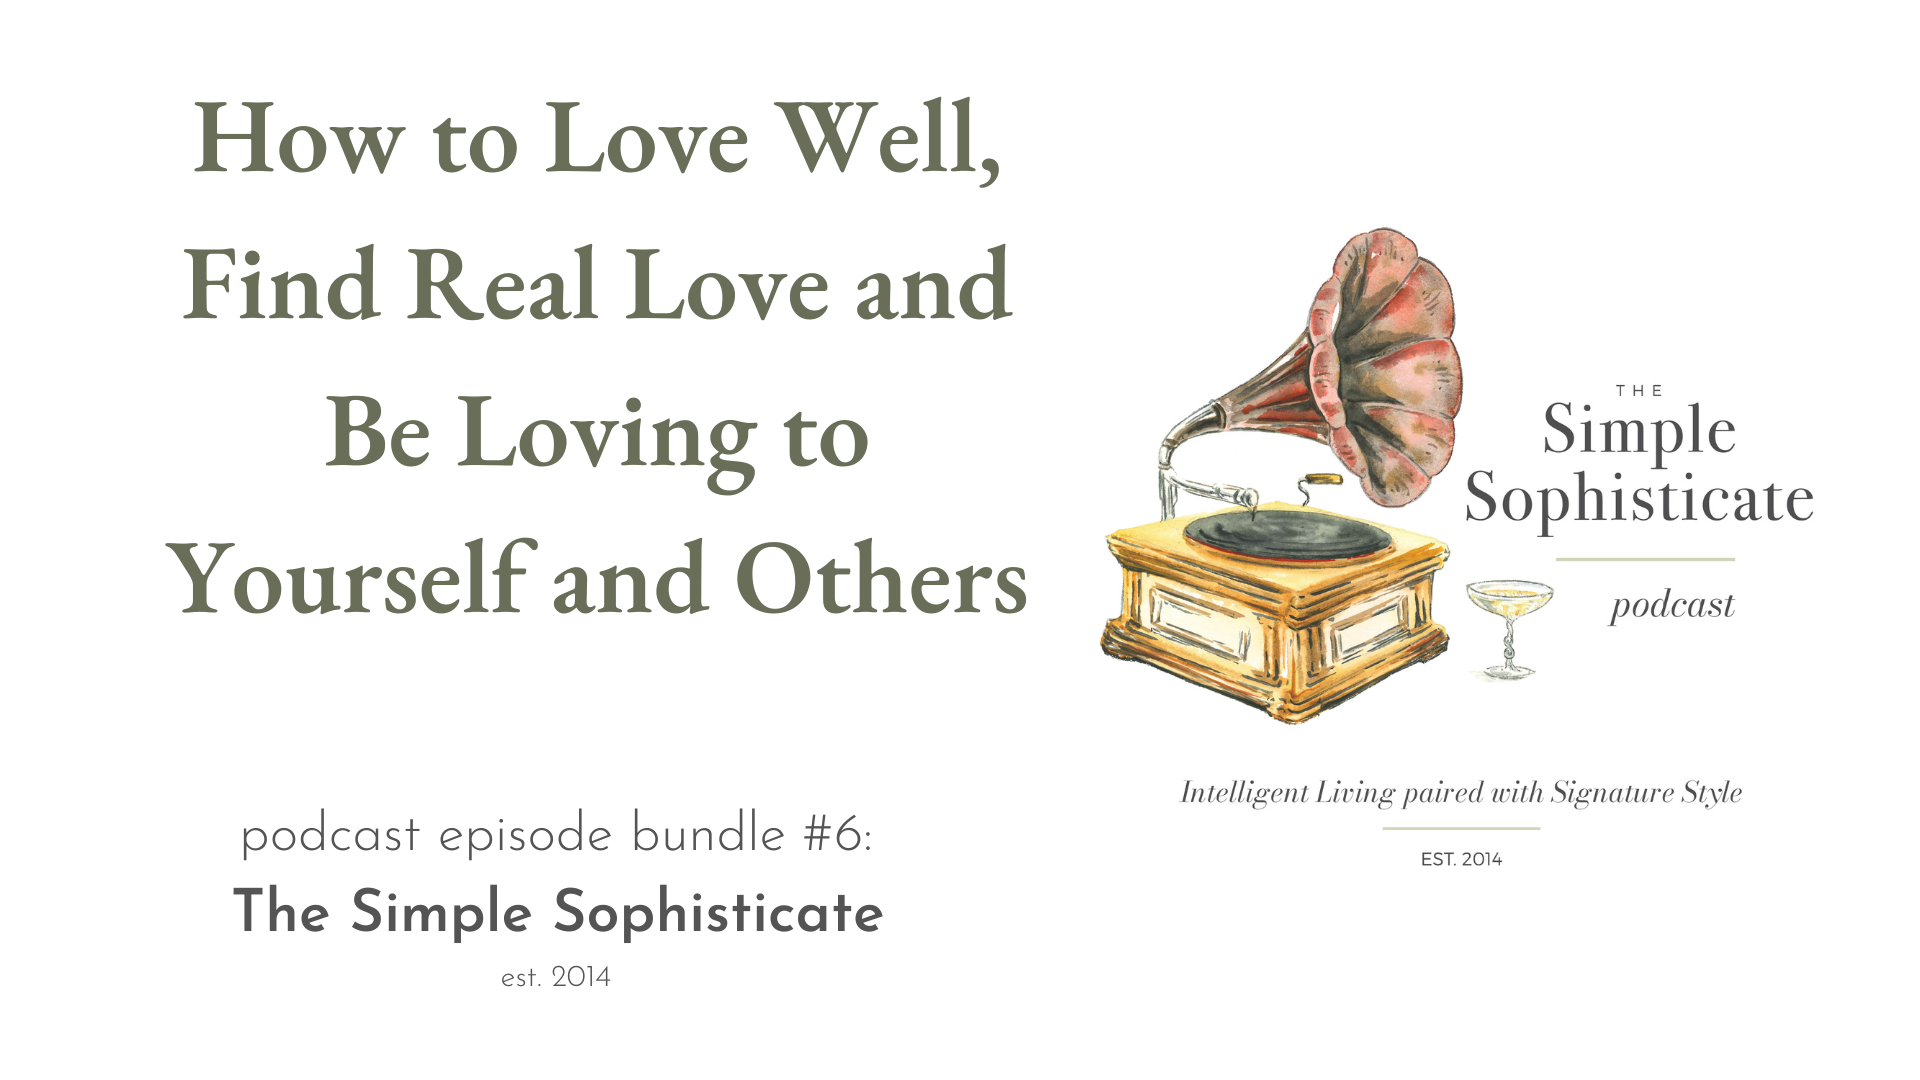 How to Love Well, Find Real Love and Be Loving to Yourself and Others: podcast bundle #6